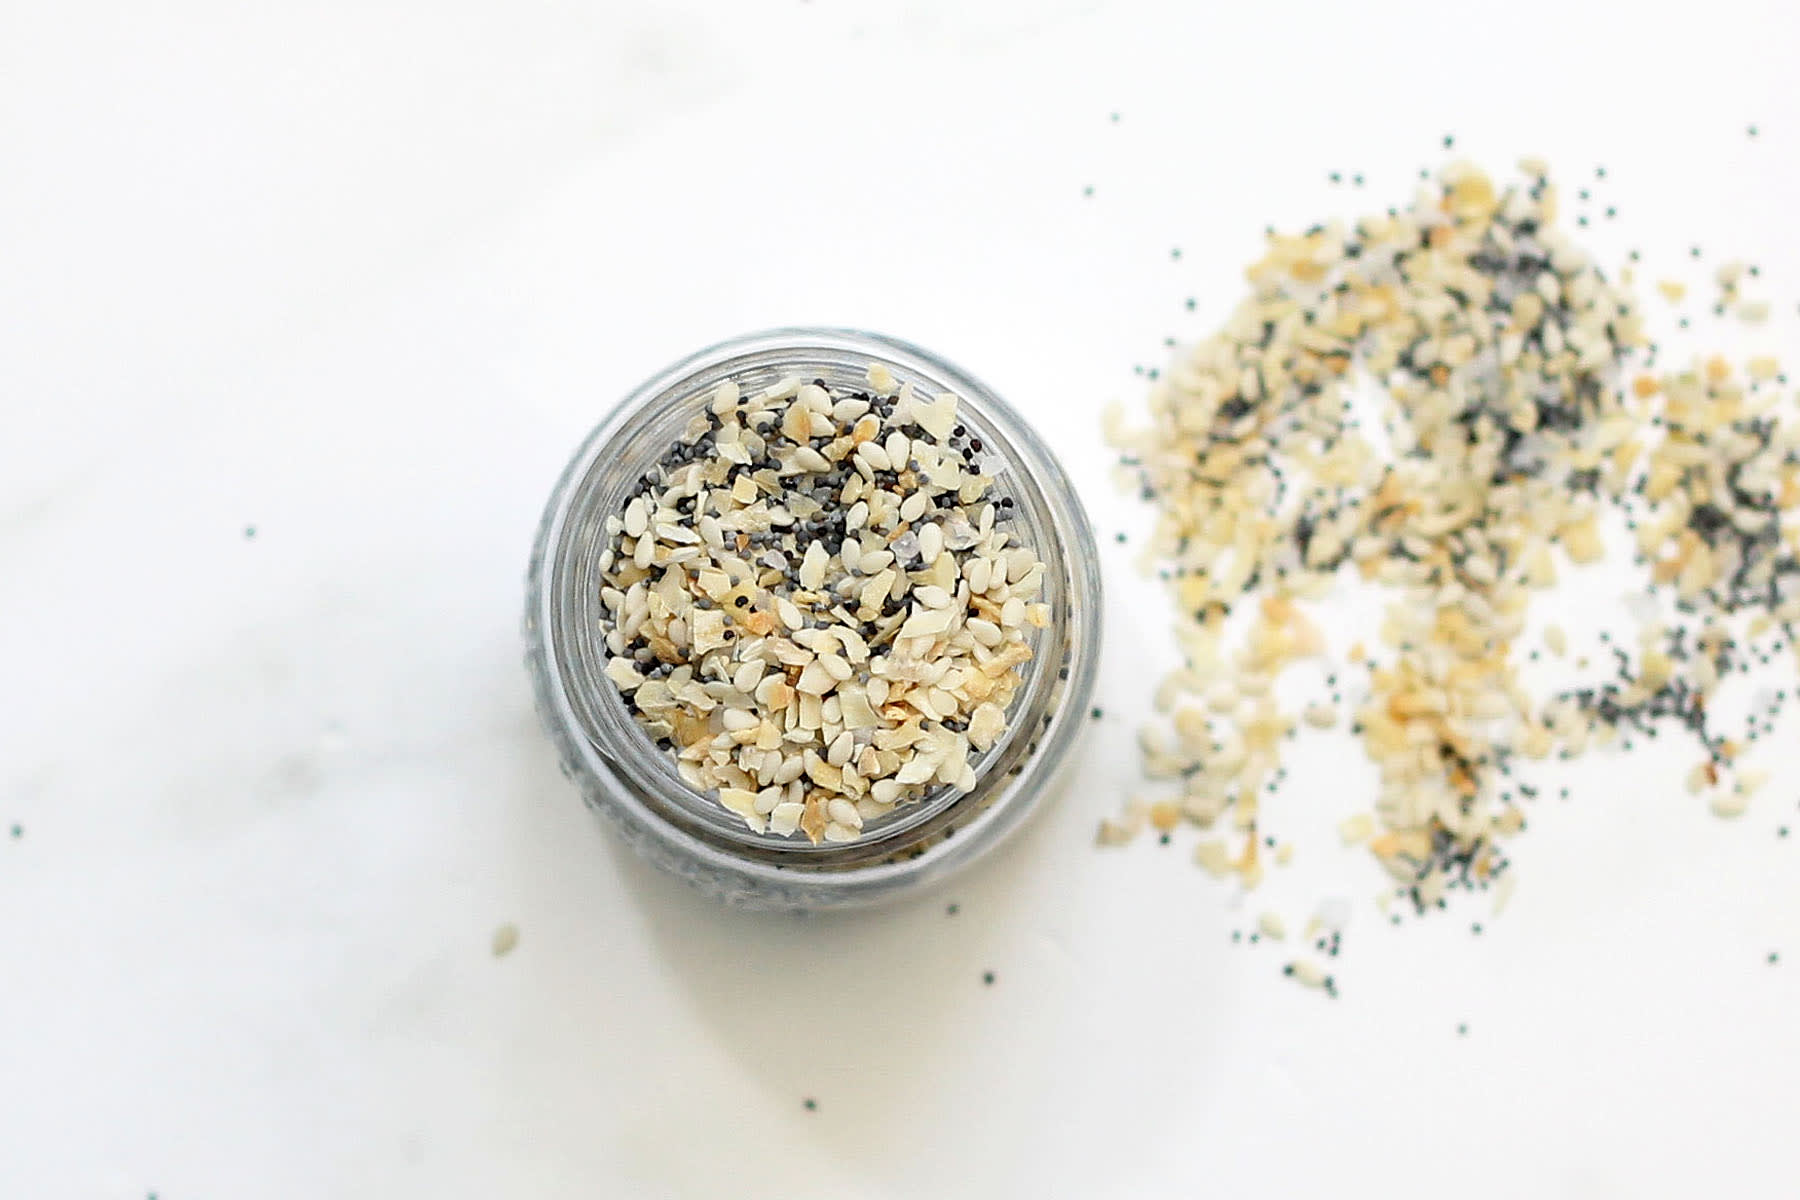 Homemade Everything Bagel Seasoning and How to Use It